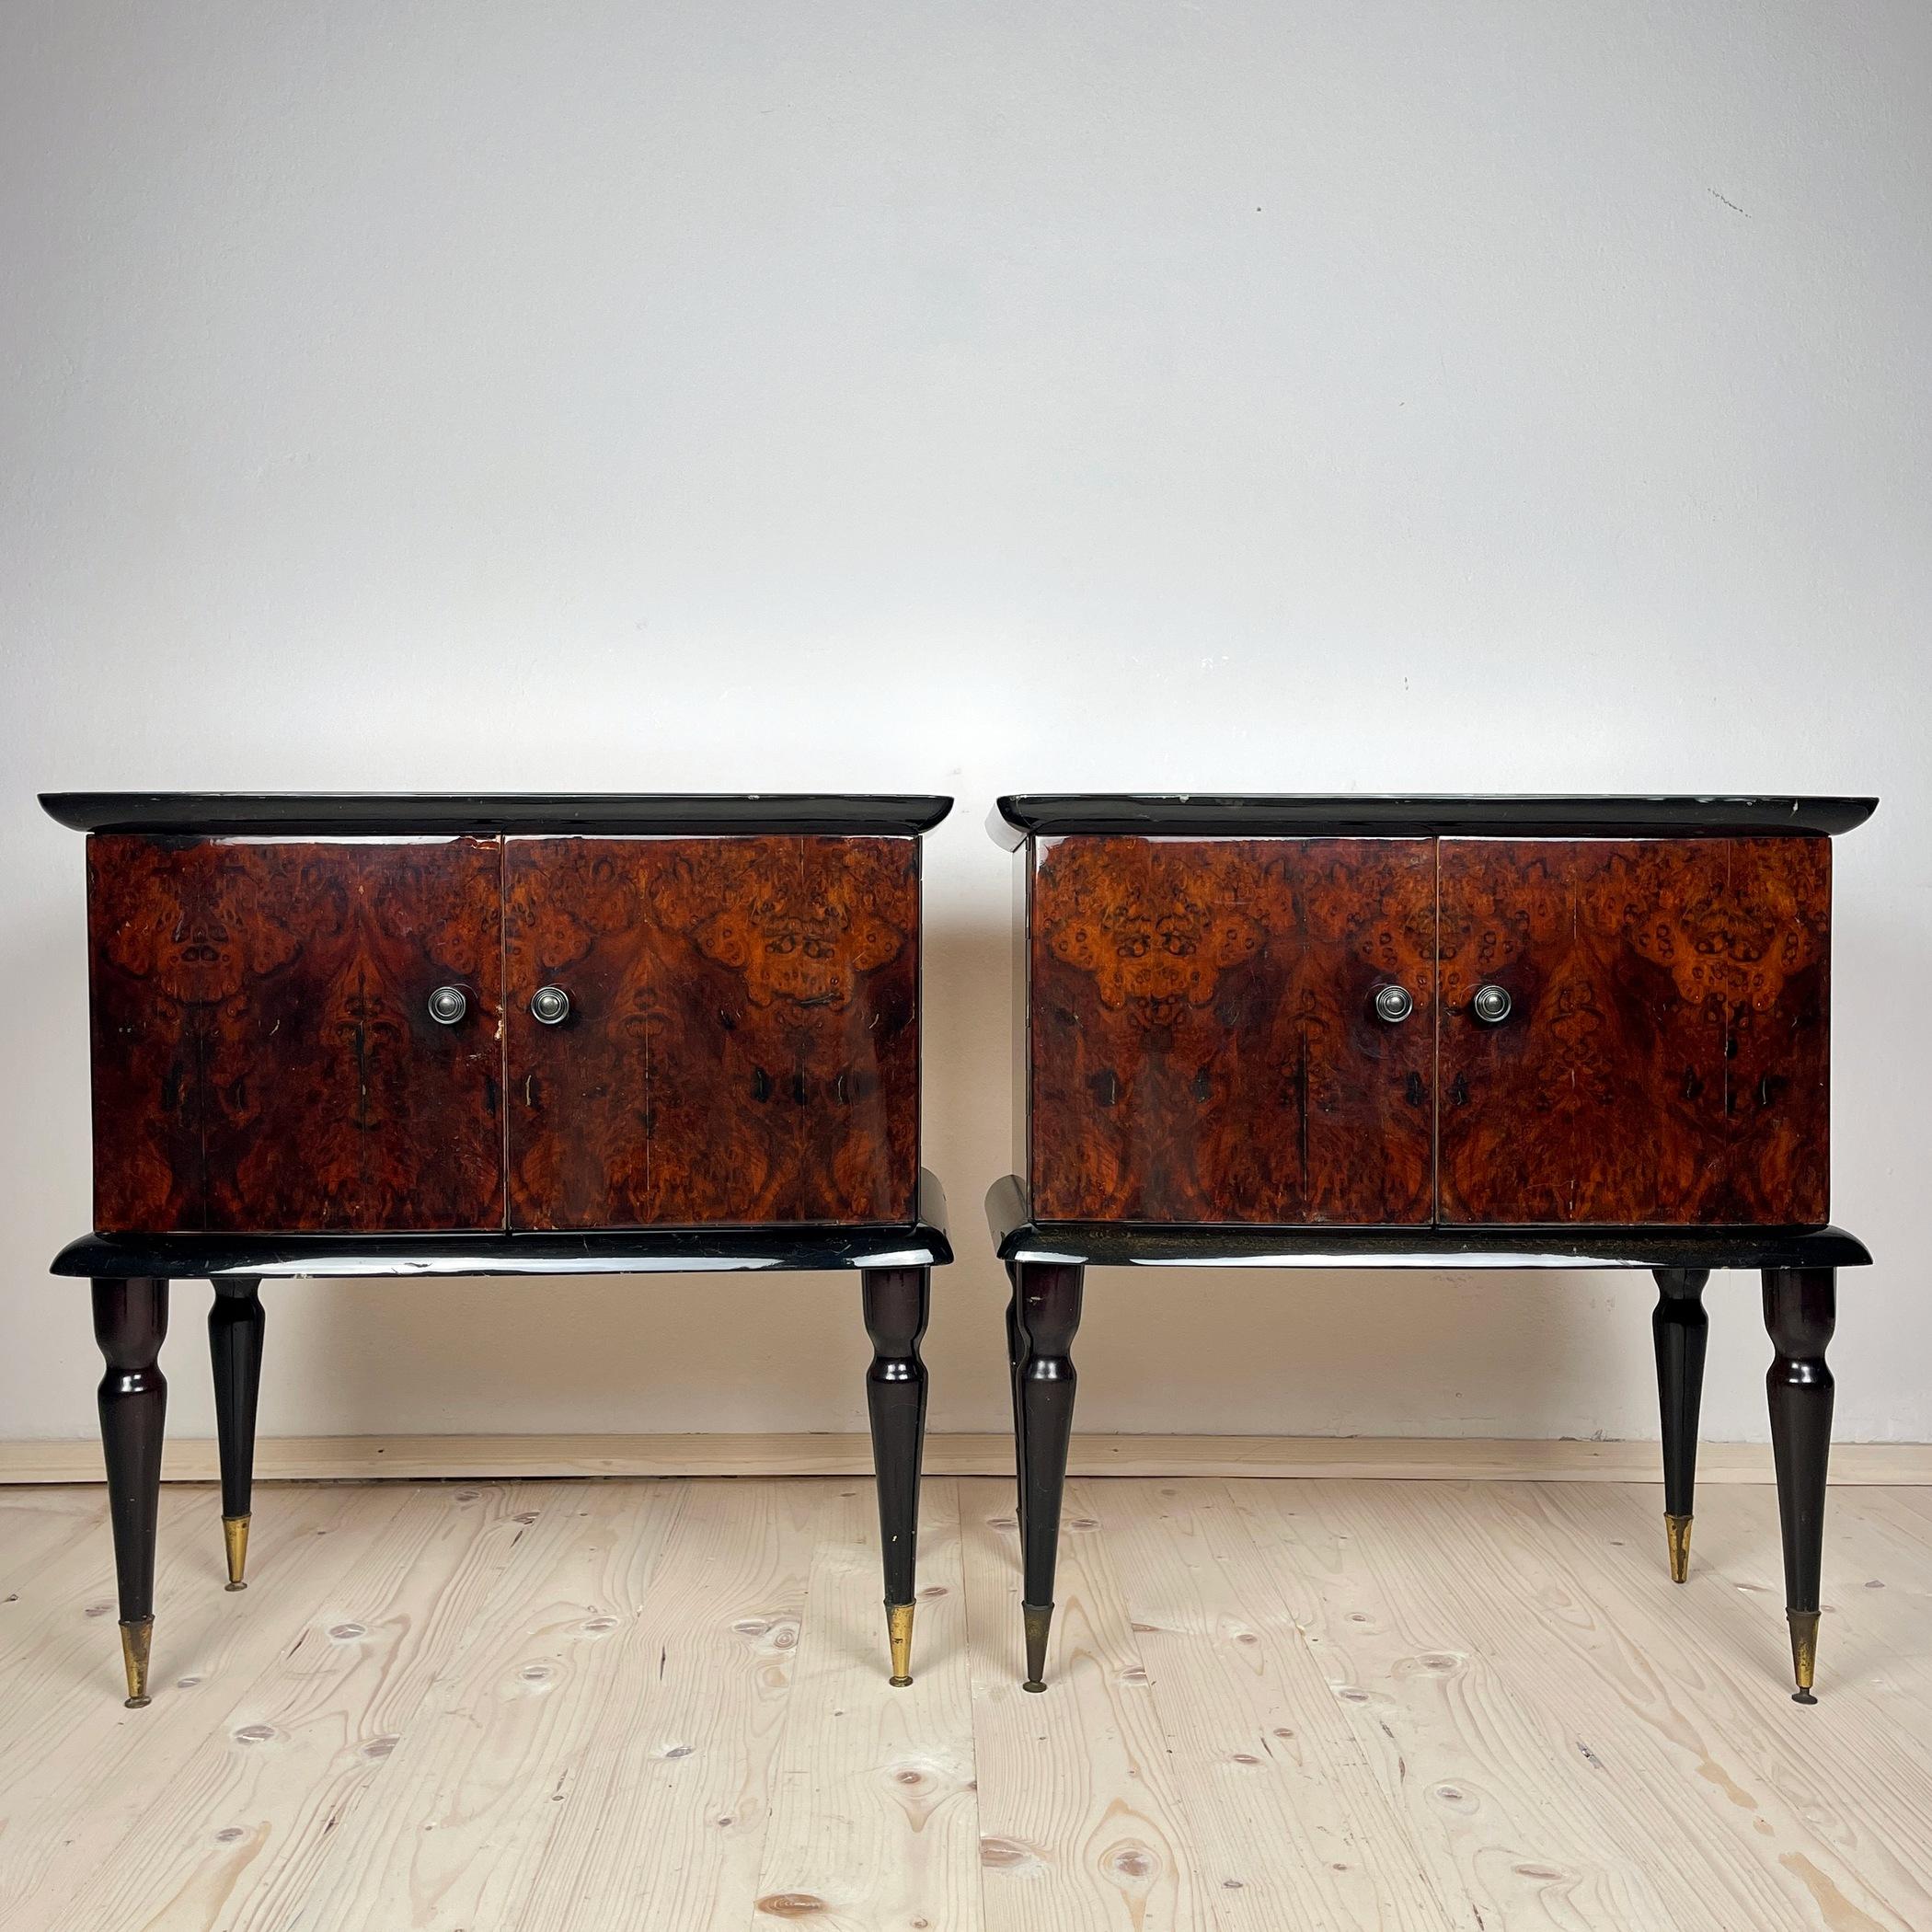 Experience the enduring charm of mid-century Italian craftsmanship with this pair of vintage bedside tables, lovingly crafted in Italy during the 1950s. These bedside tables are a testament to the quality of materials and craftsmanship of their era.